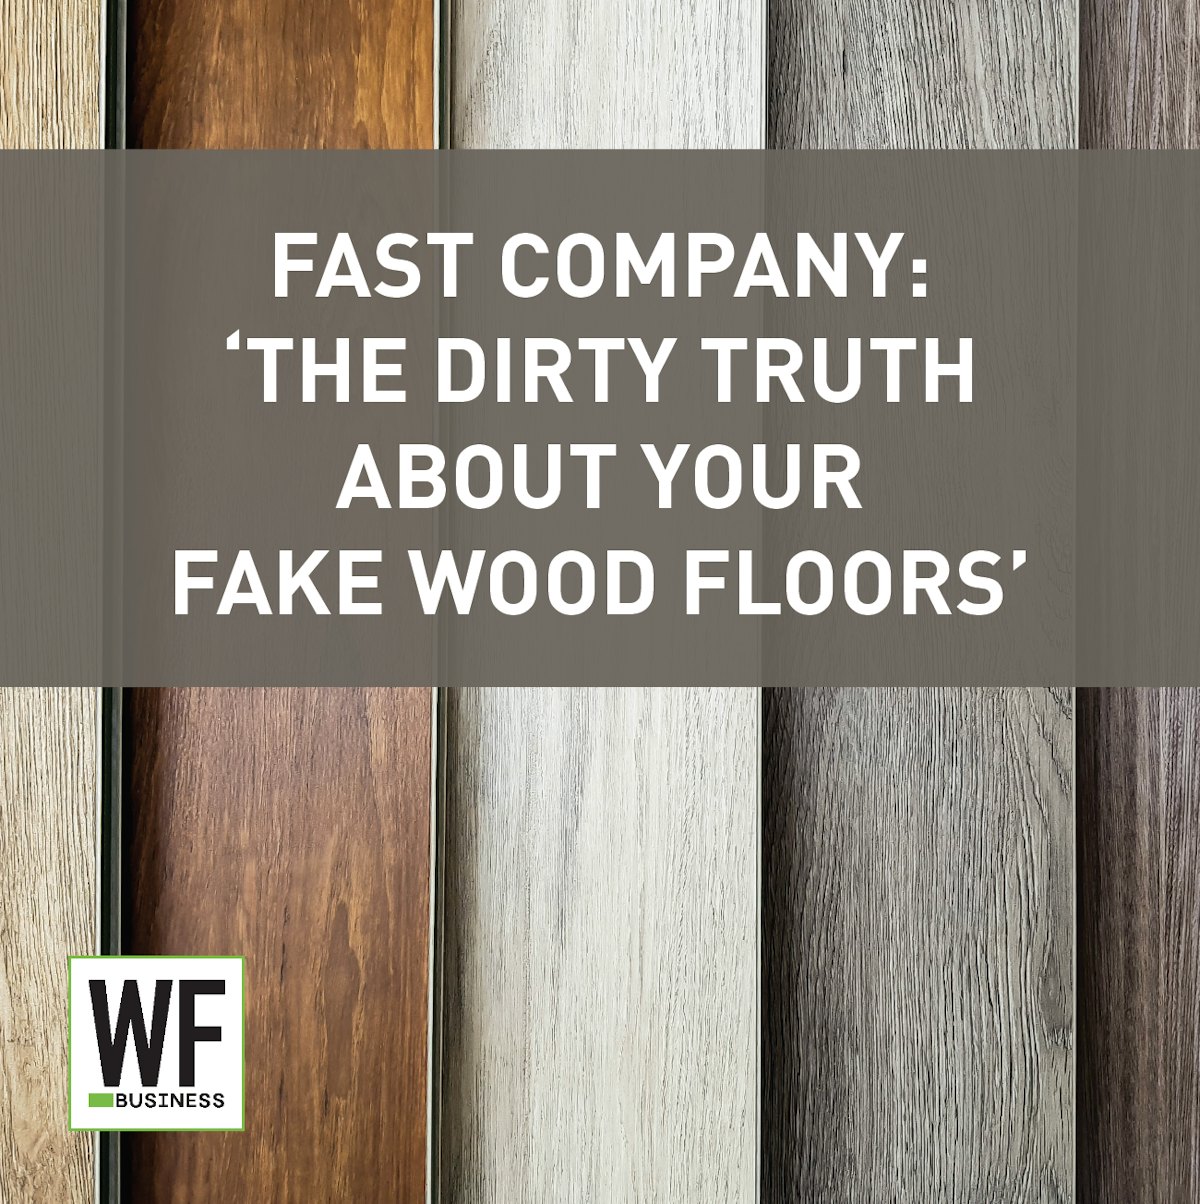 Fast Company: 'The Dirty Truth About Your Fake Wood Floors